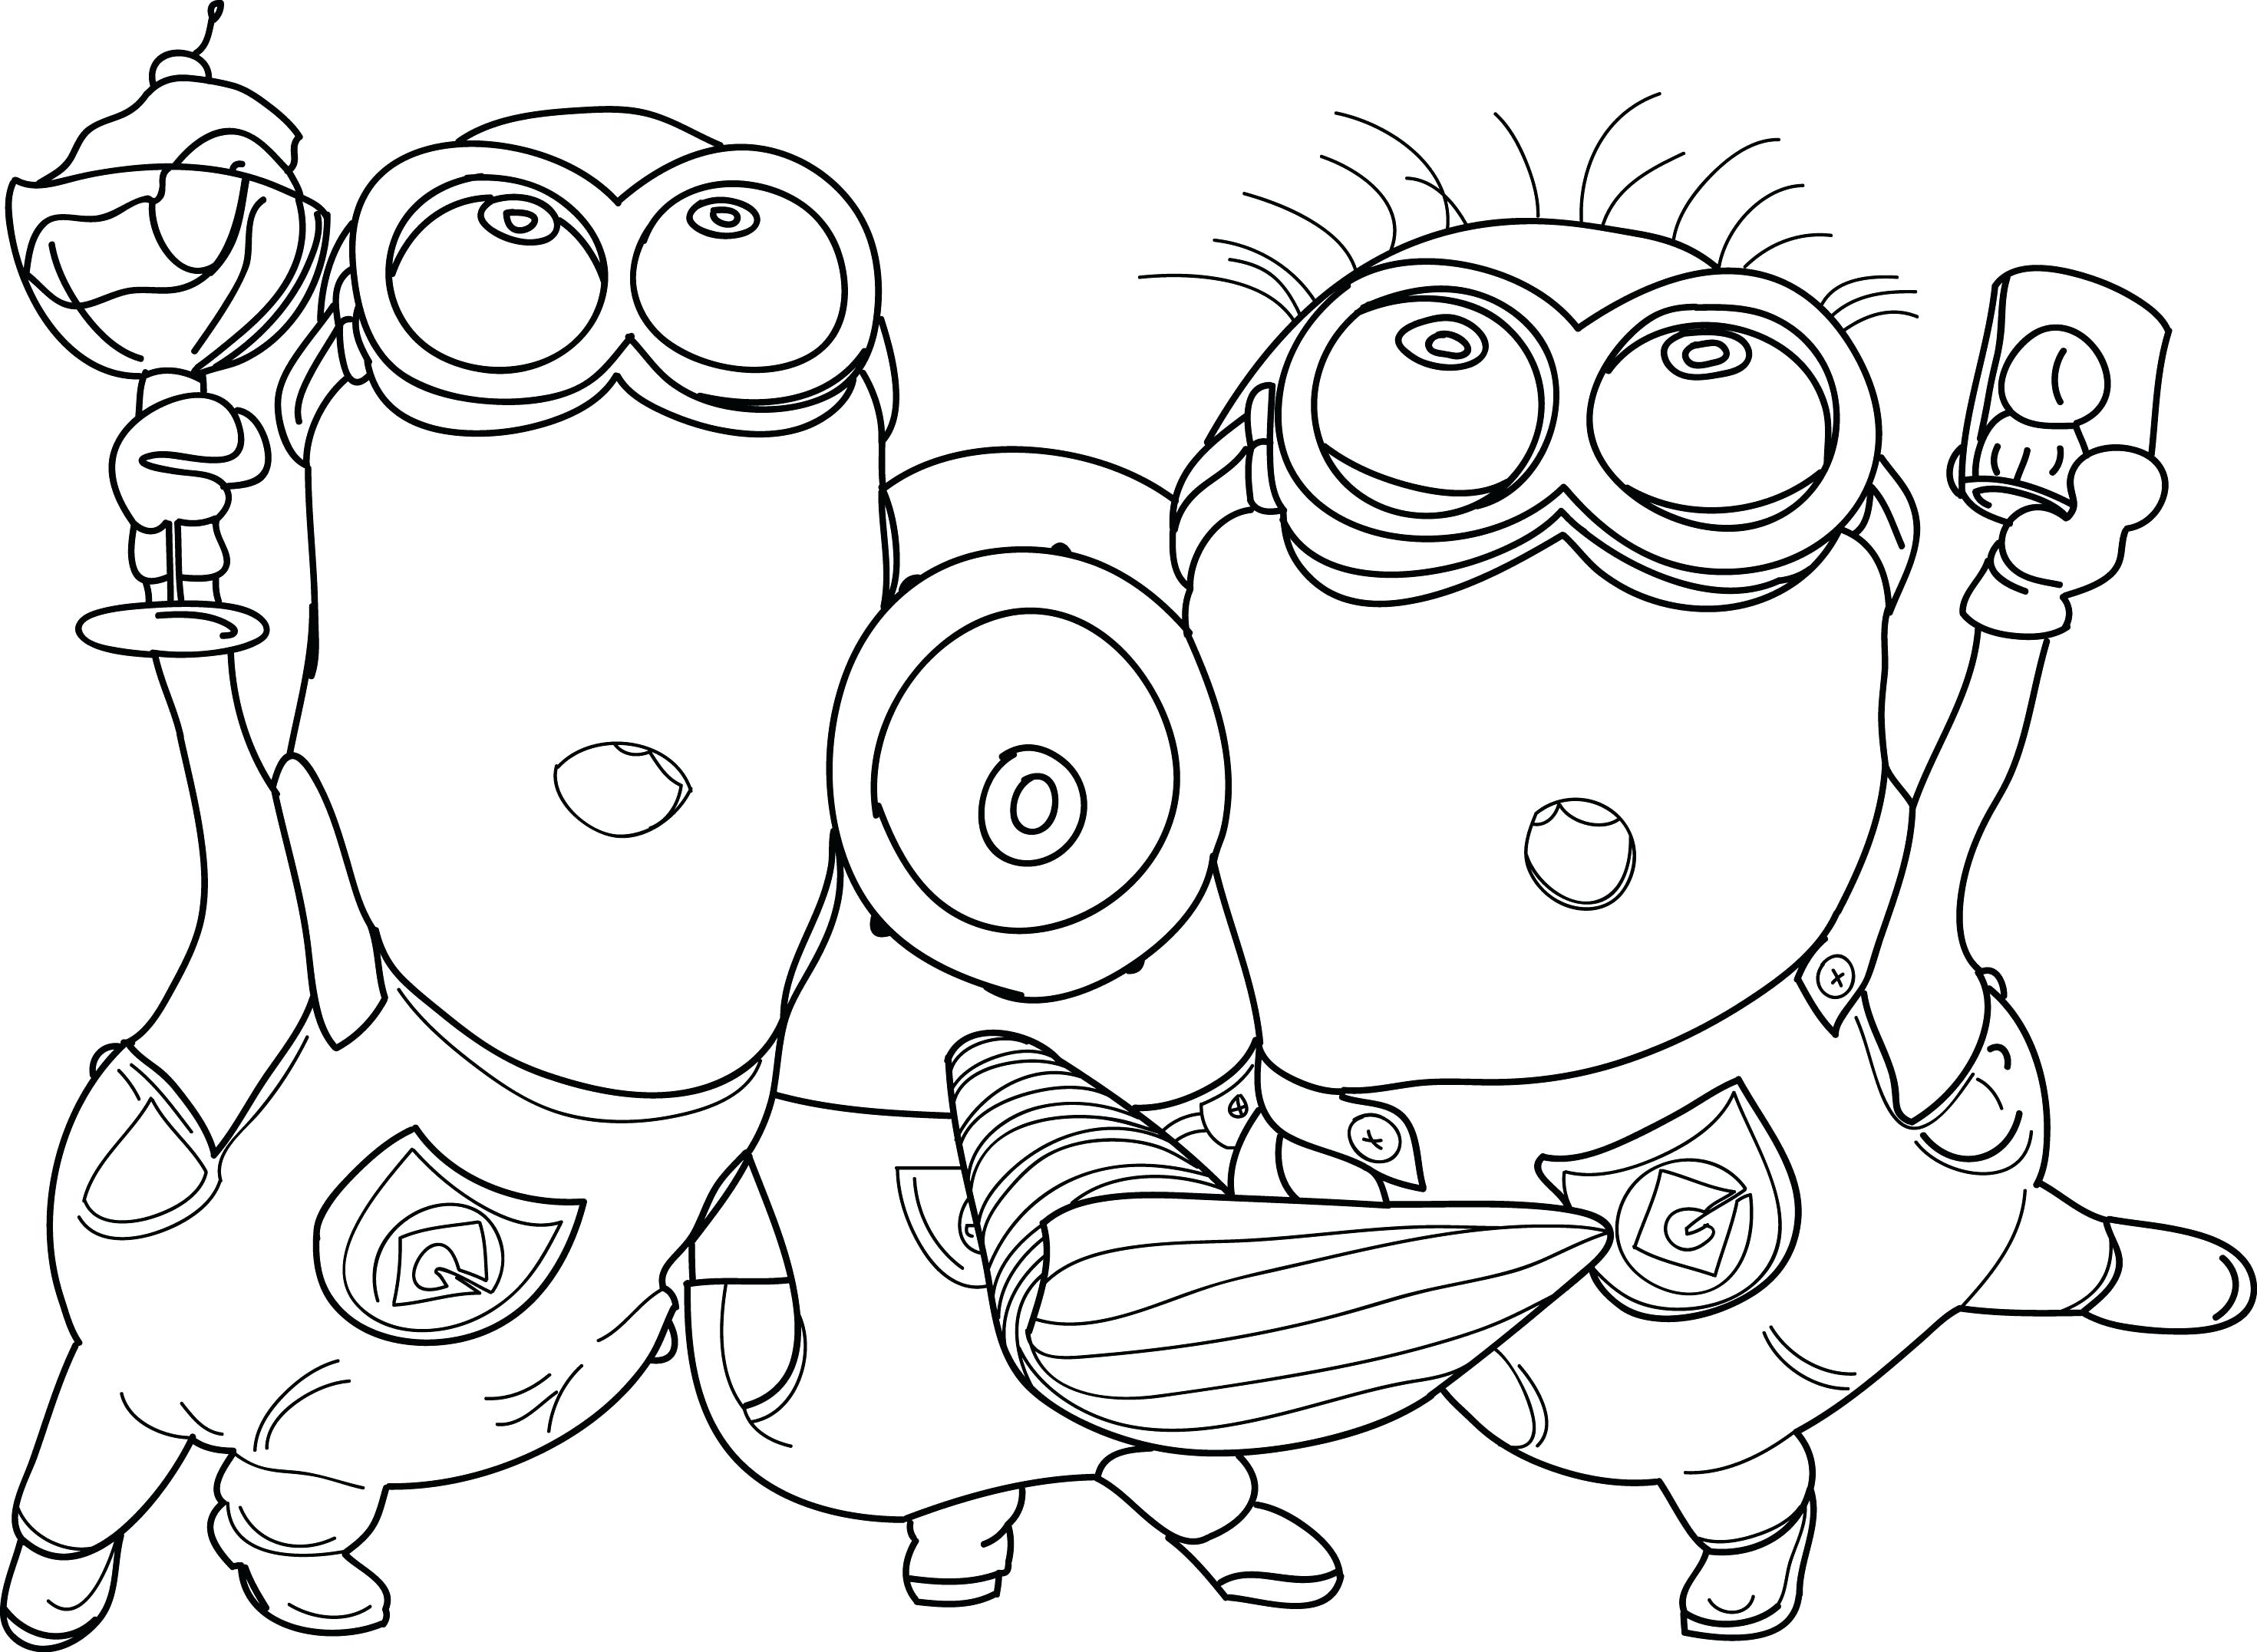 minion-coloring-pages-adult-coloring-pages